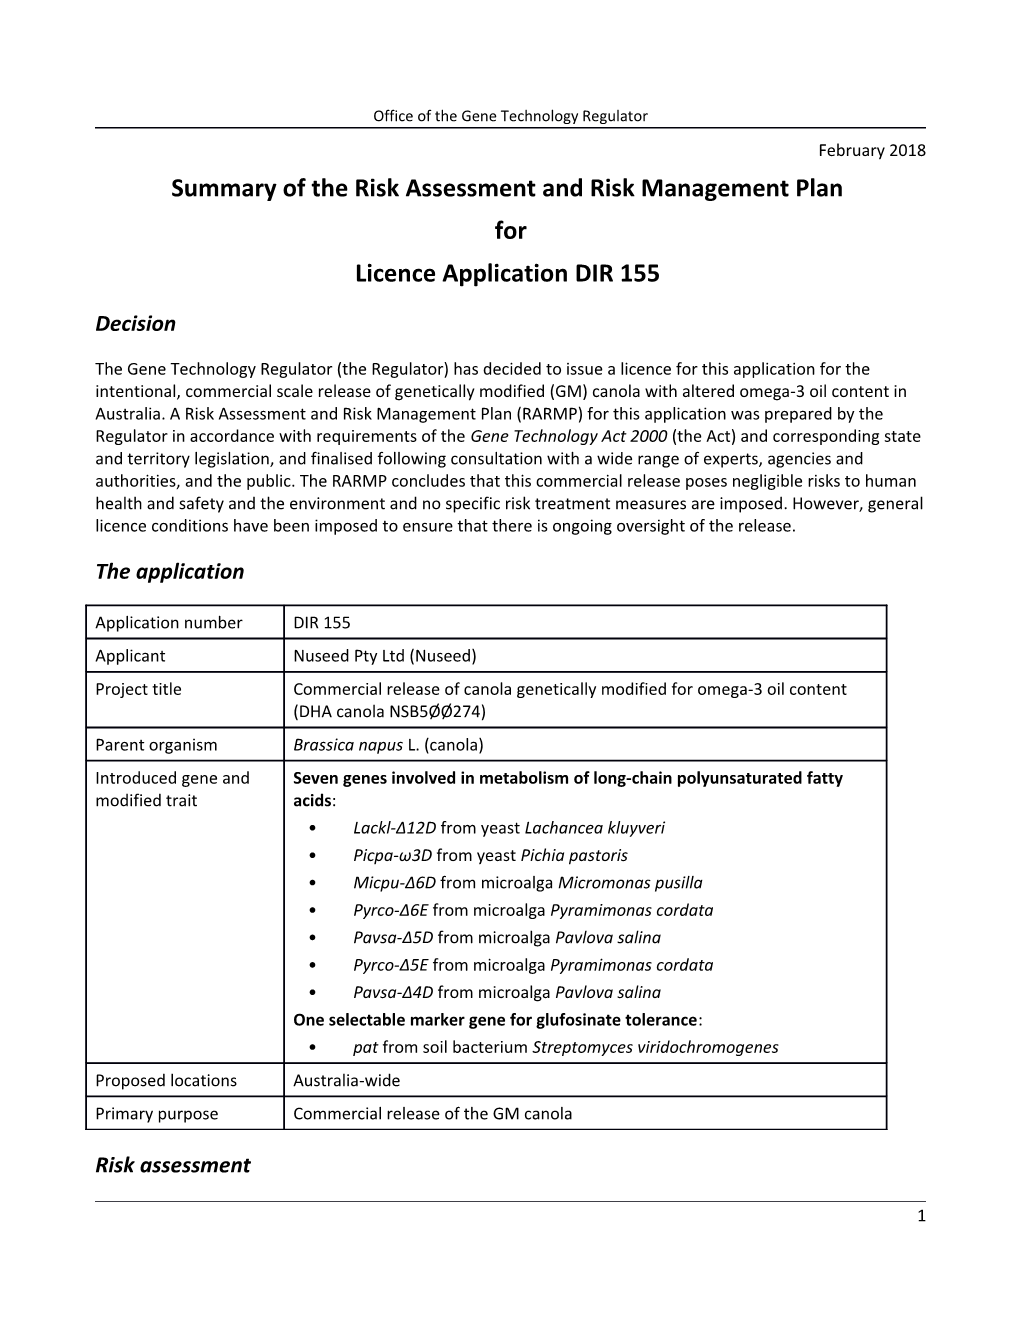 DIR 155 - Summary of Risk Assessment and Risk Management Plan